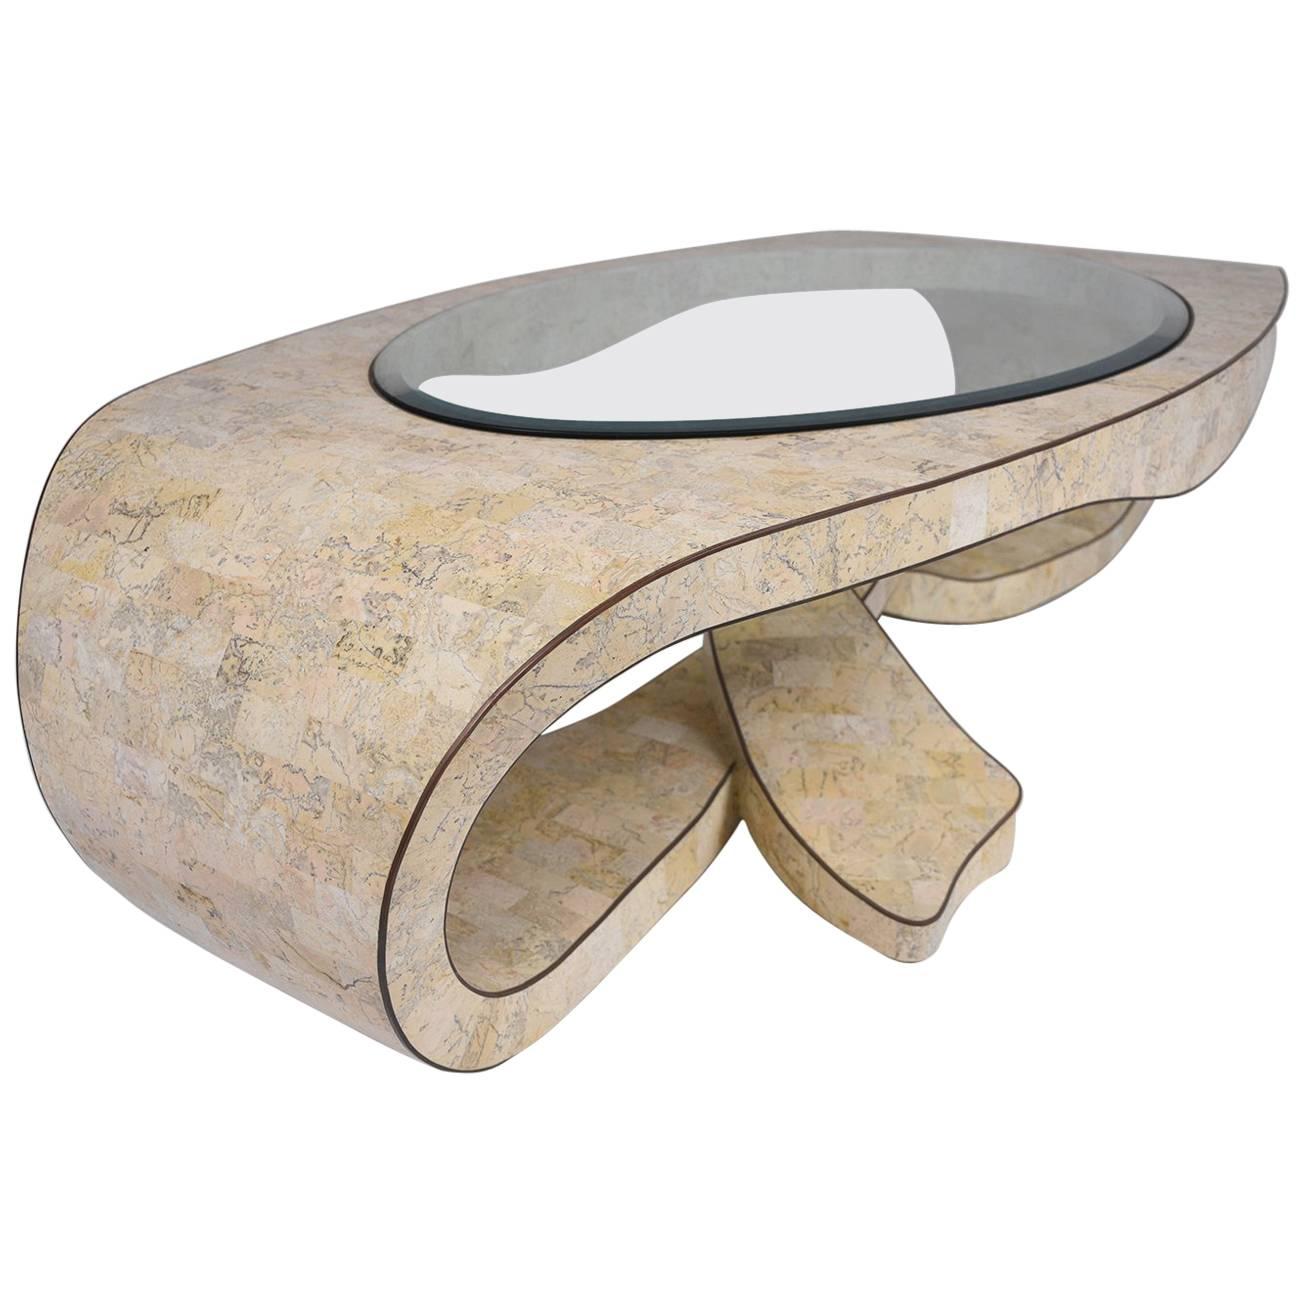 This unique 1970s vintage coffee table is made by Maitland-Smith Tessellated. The coffee table features a frame made from stone and glass with brass moudling details around the edges. The unique shape of the frame overlaps at the center of the base